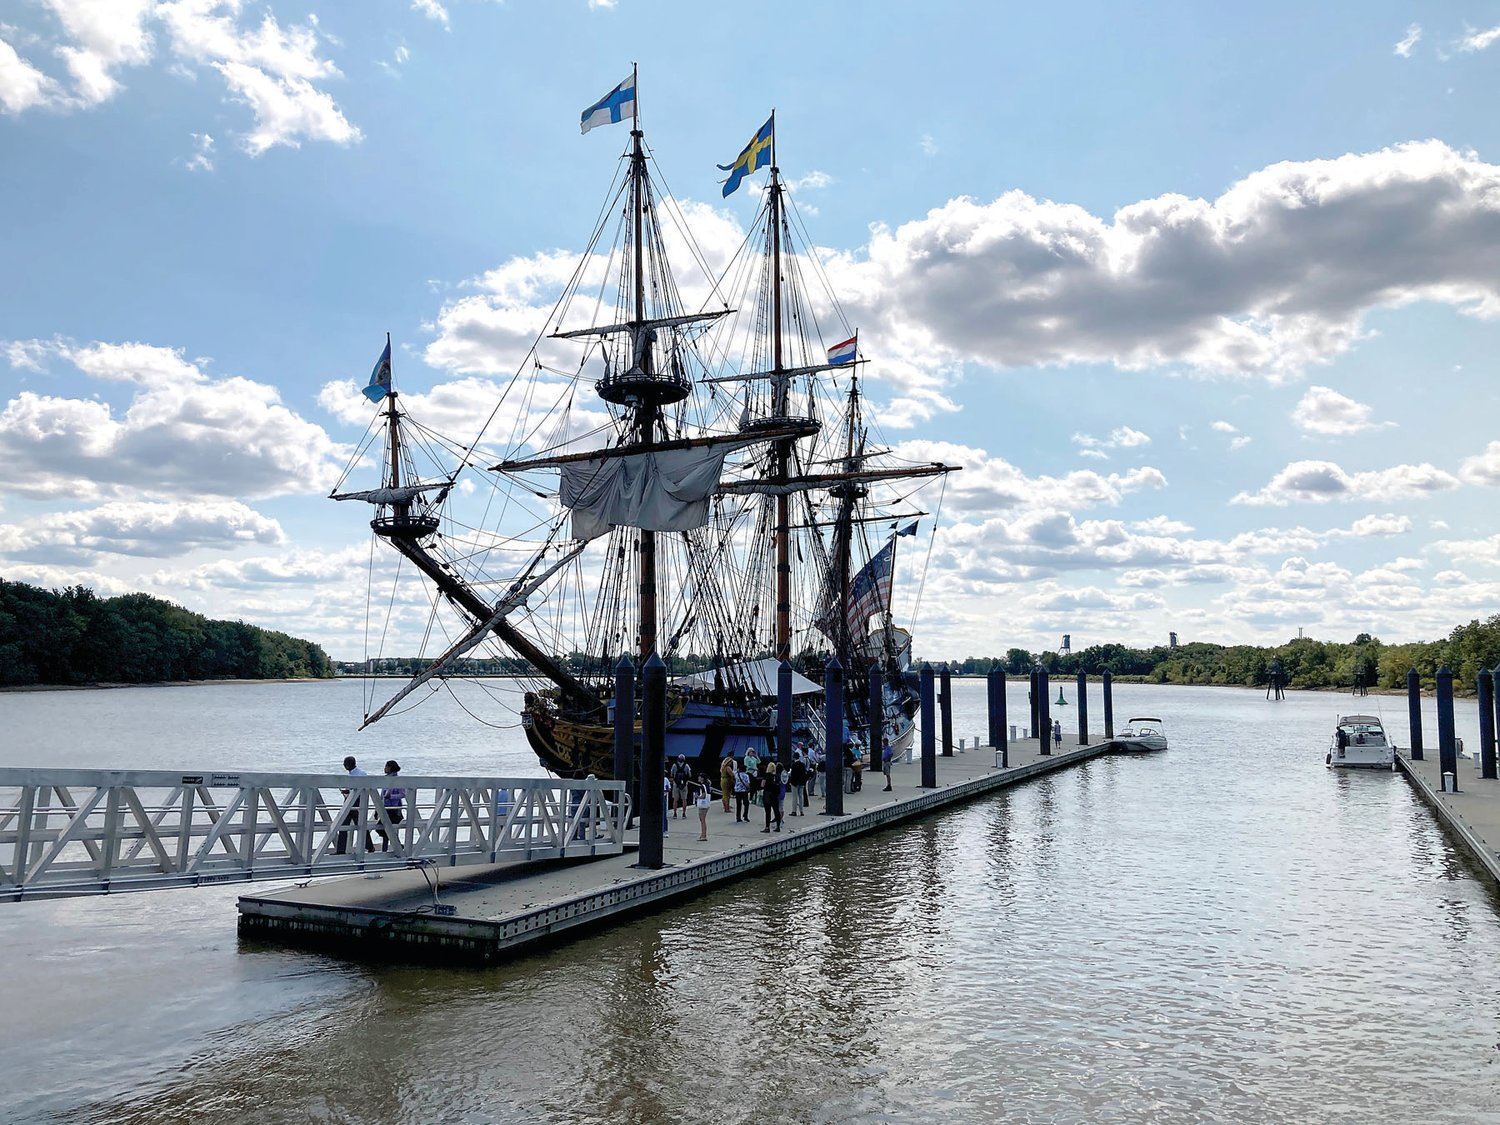 The Kalmar Nyckel sits alongside docks in Bristol Borough after finishing the educational excursion on the Delaware River September 10.